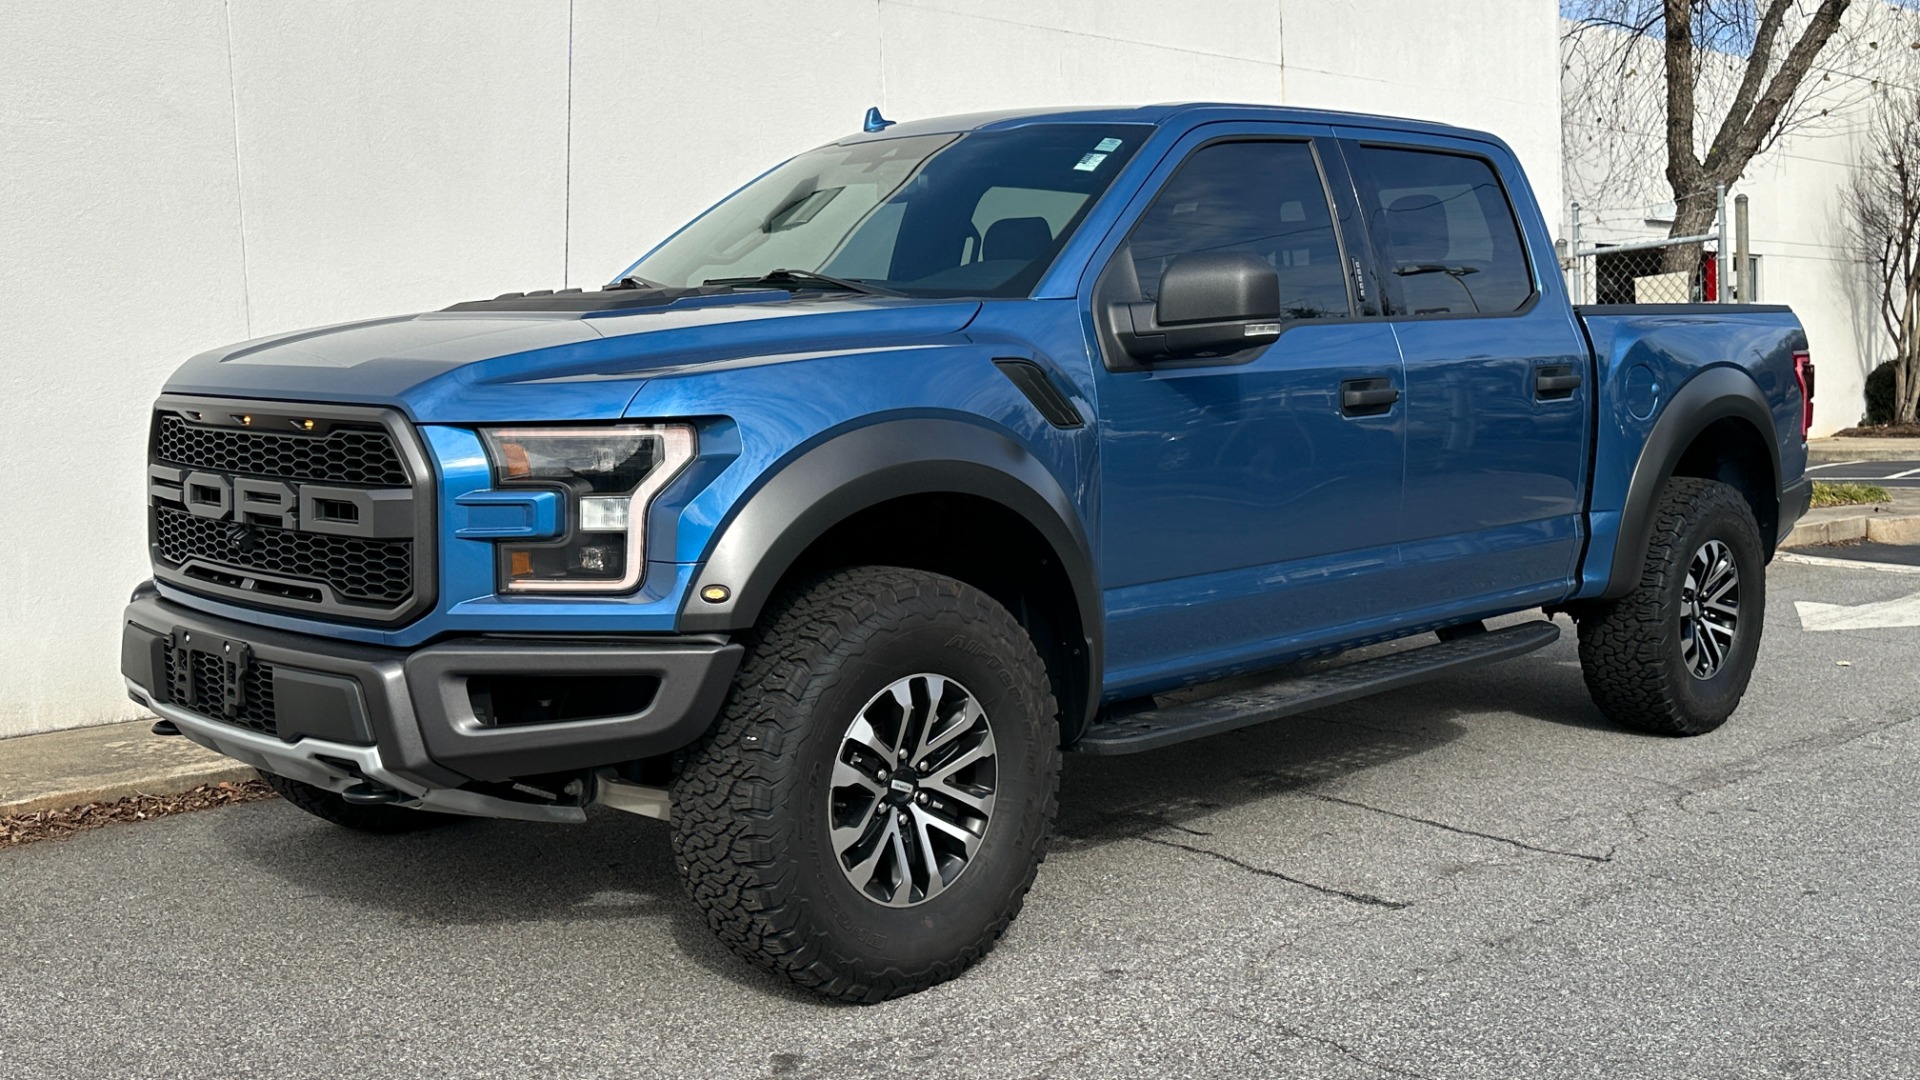 Used 2019 Ford F-150 RAPTOR / HIGH OUTPUT ECOBOOST / PANORAMIC ROOF / NAVIGATION / 802A PACKAGE  for sale $65,995 at Formula Imports in Charlotte NC 28227 6